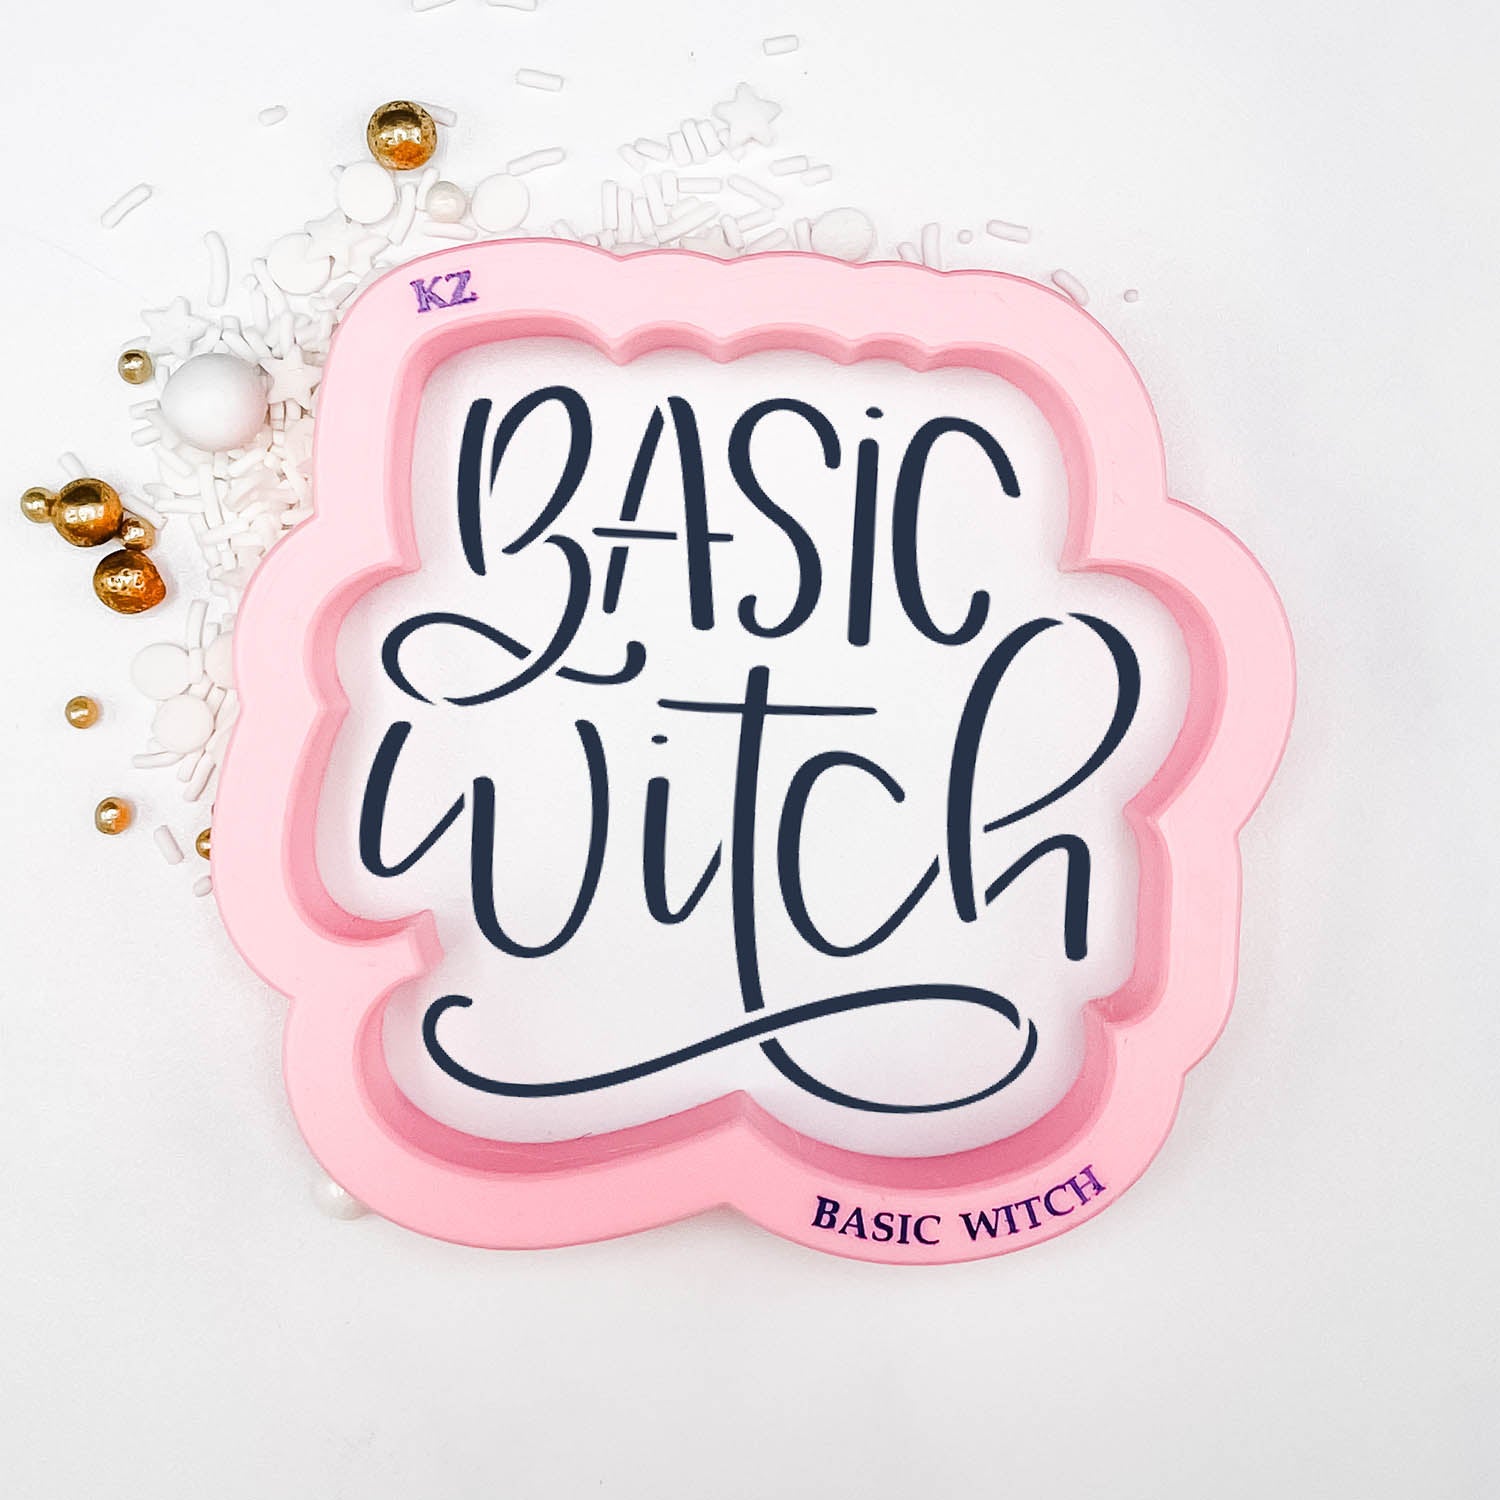 cookie cutter in the shape of the words "basic witch"